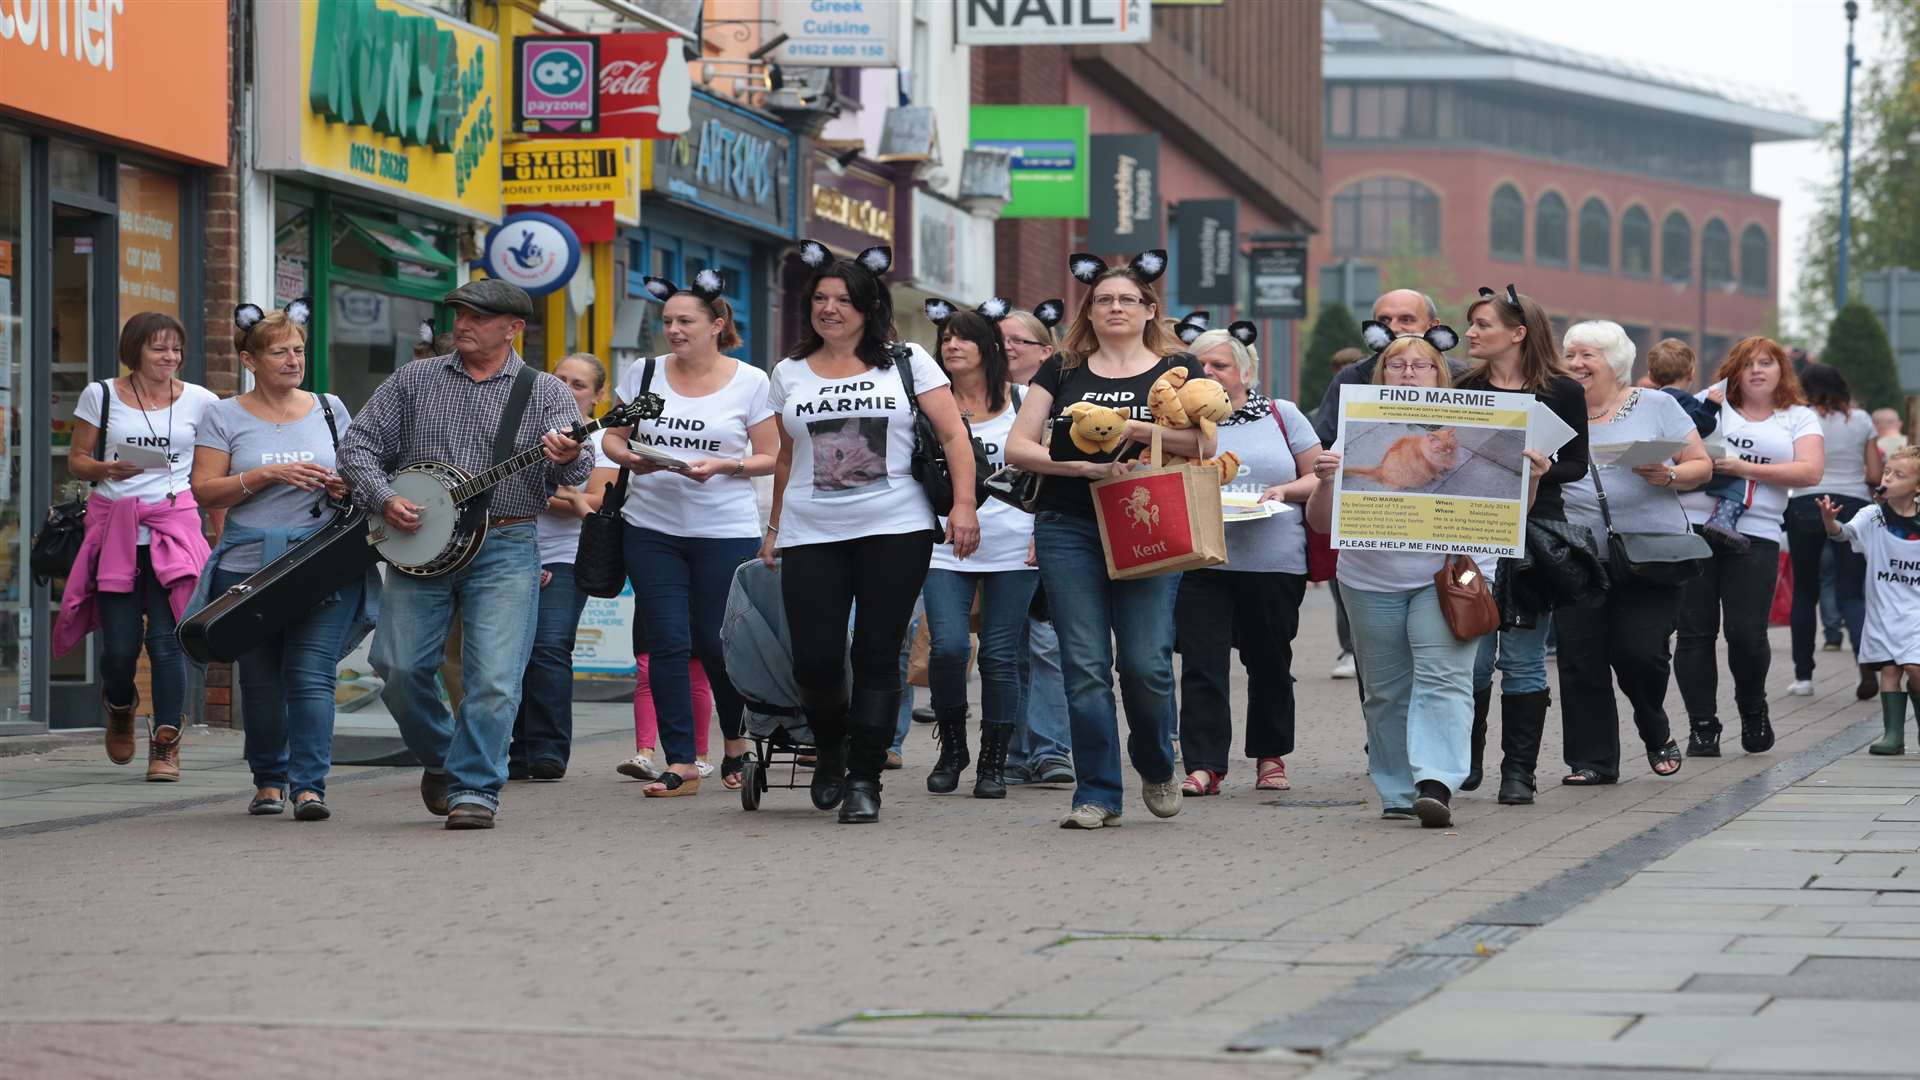 Dozens of supporters turned up to march with Tracy Brewster in a bid to find Marmie